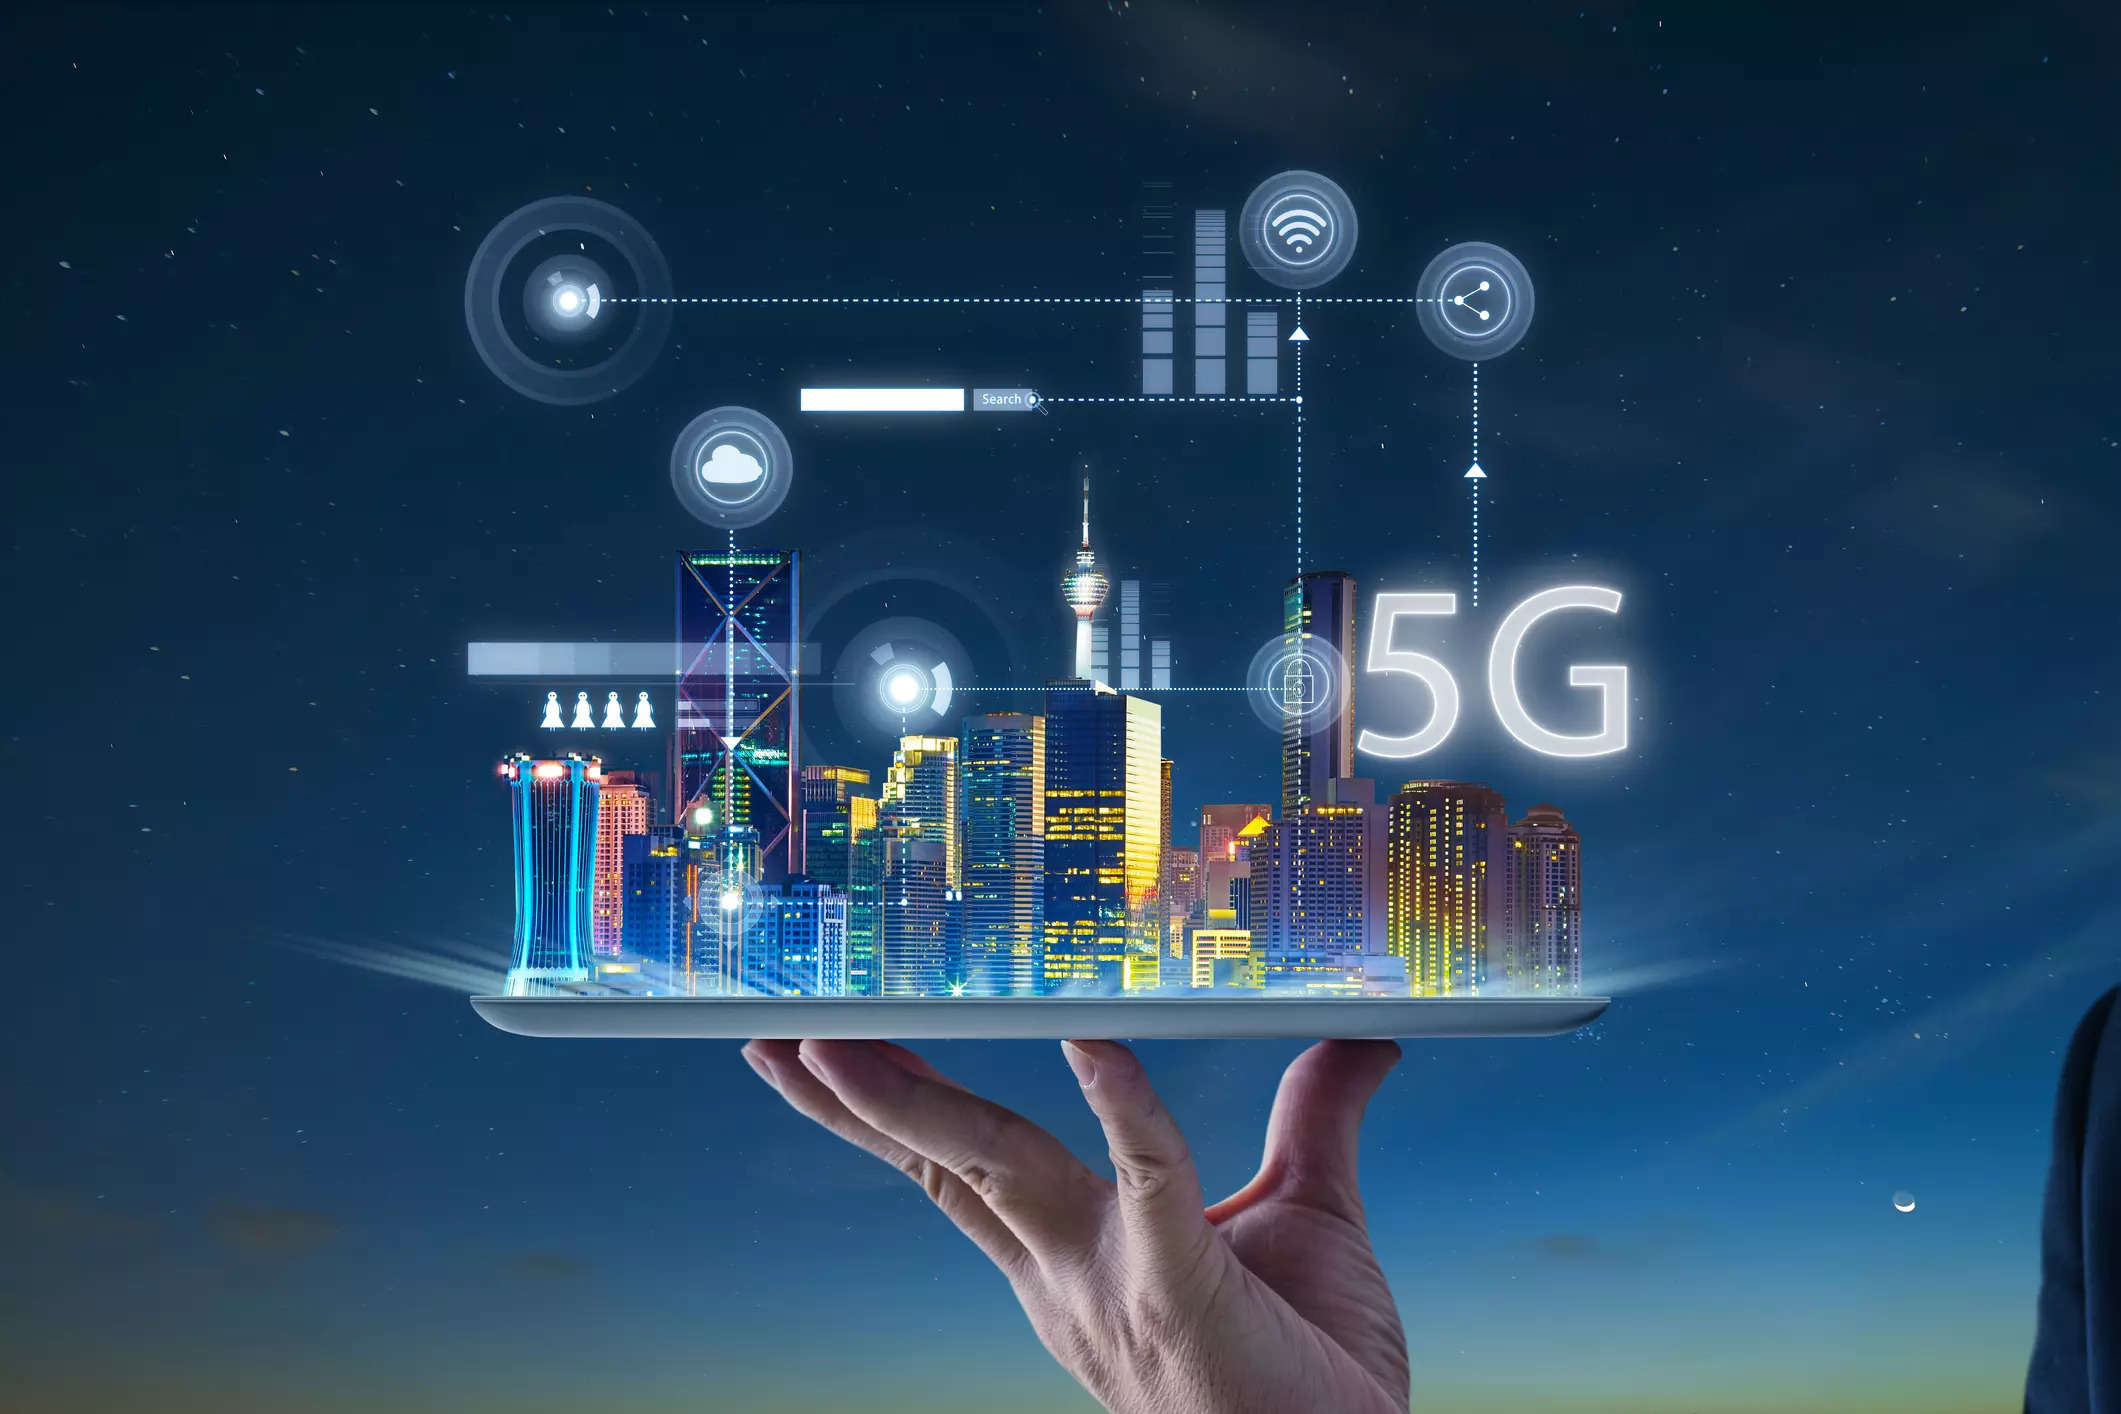 Union Cabinet Approves 5G Spectrum Auction in July